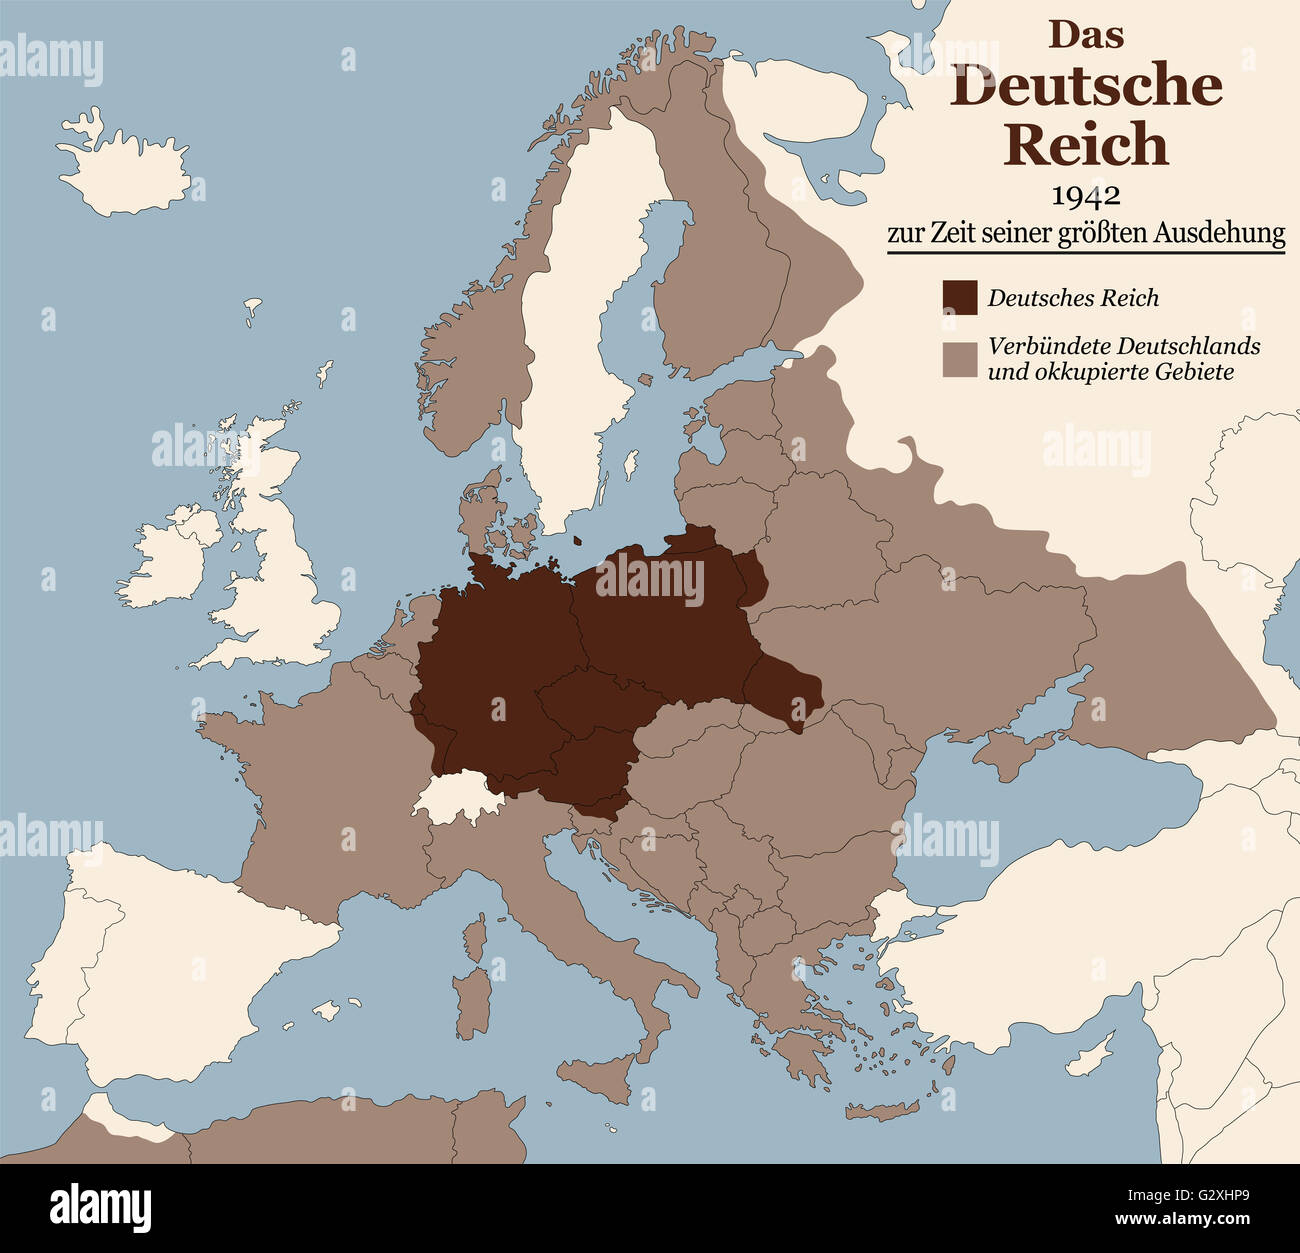 Third Reich at its greatest extent in 1942. Map of Nazi Germany in Europe in Second World War. GERMAN LABELING! Stock Photo